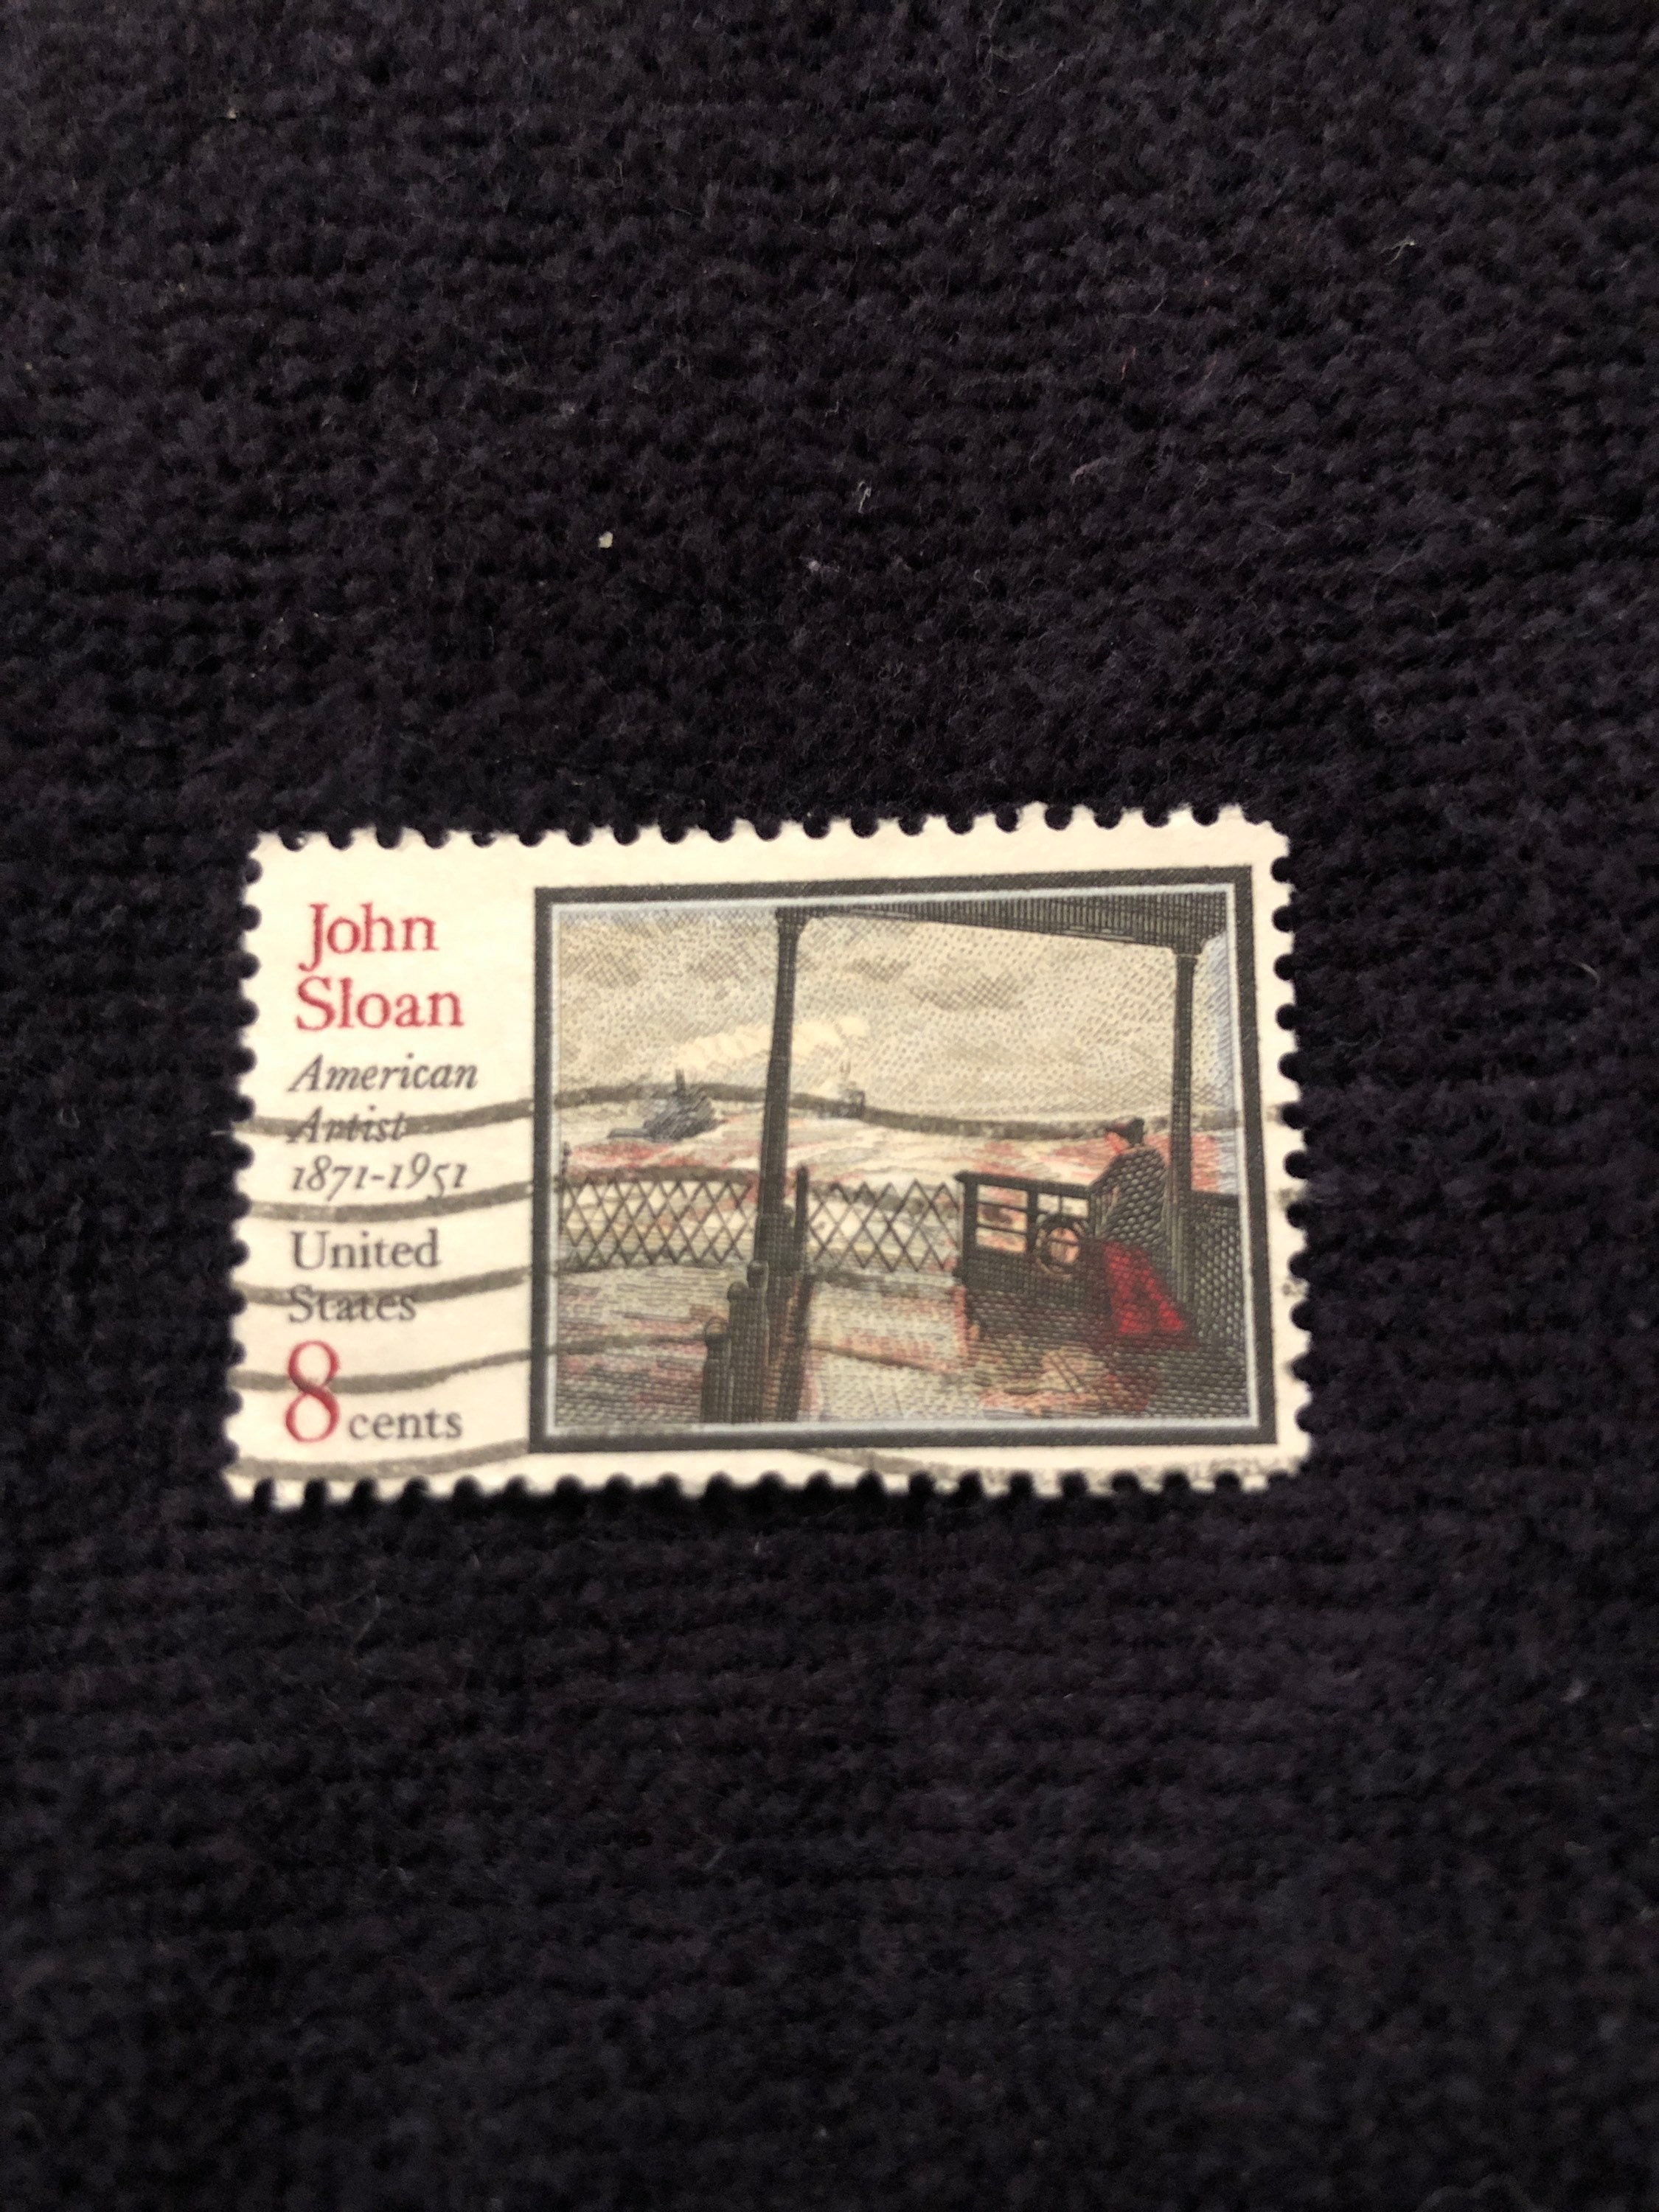 10 Unused Vintage Postage Stamps for Mailing Letters USPS  John Sloan Painting Art  8 cents  1971  No 1433